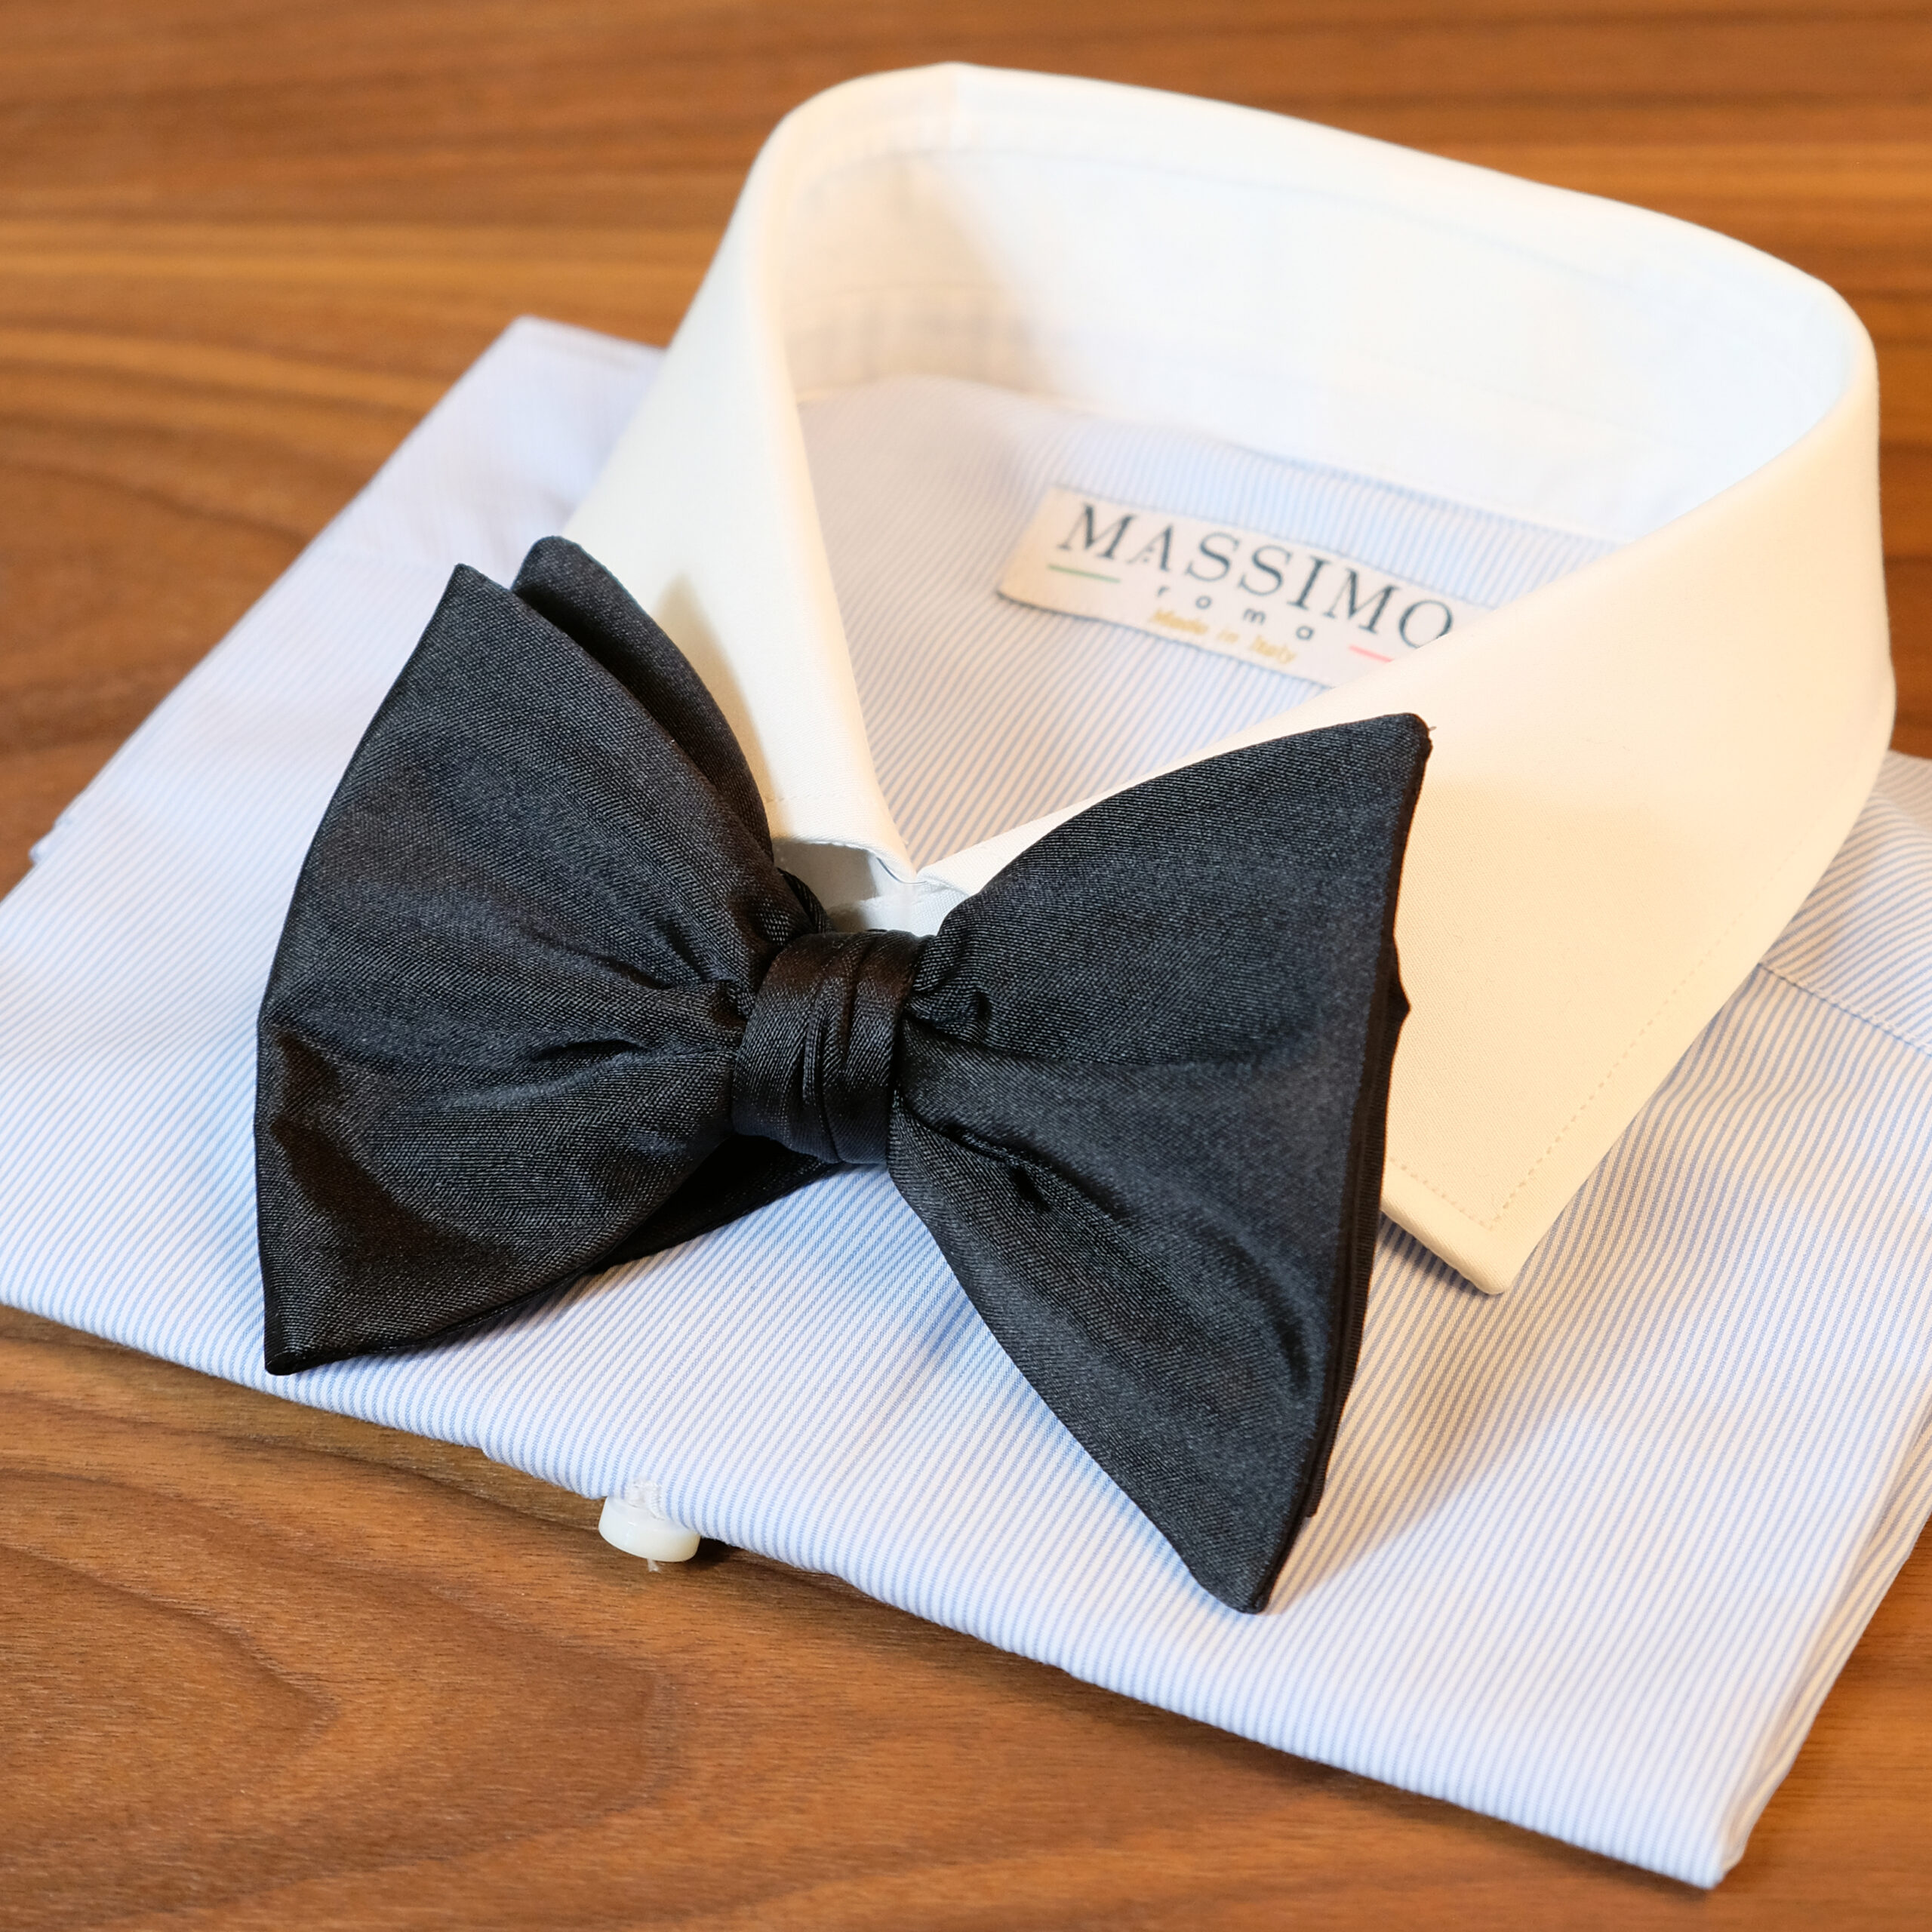 A black bow tie on top of a white shirt.